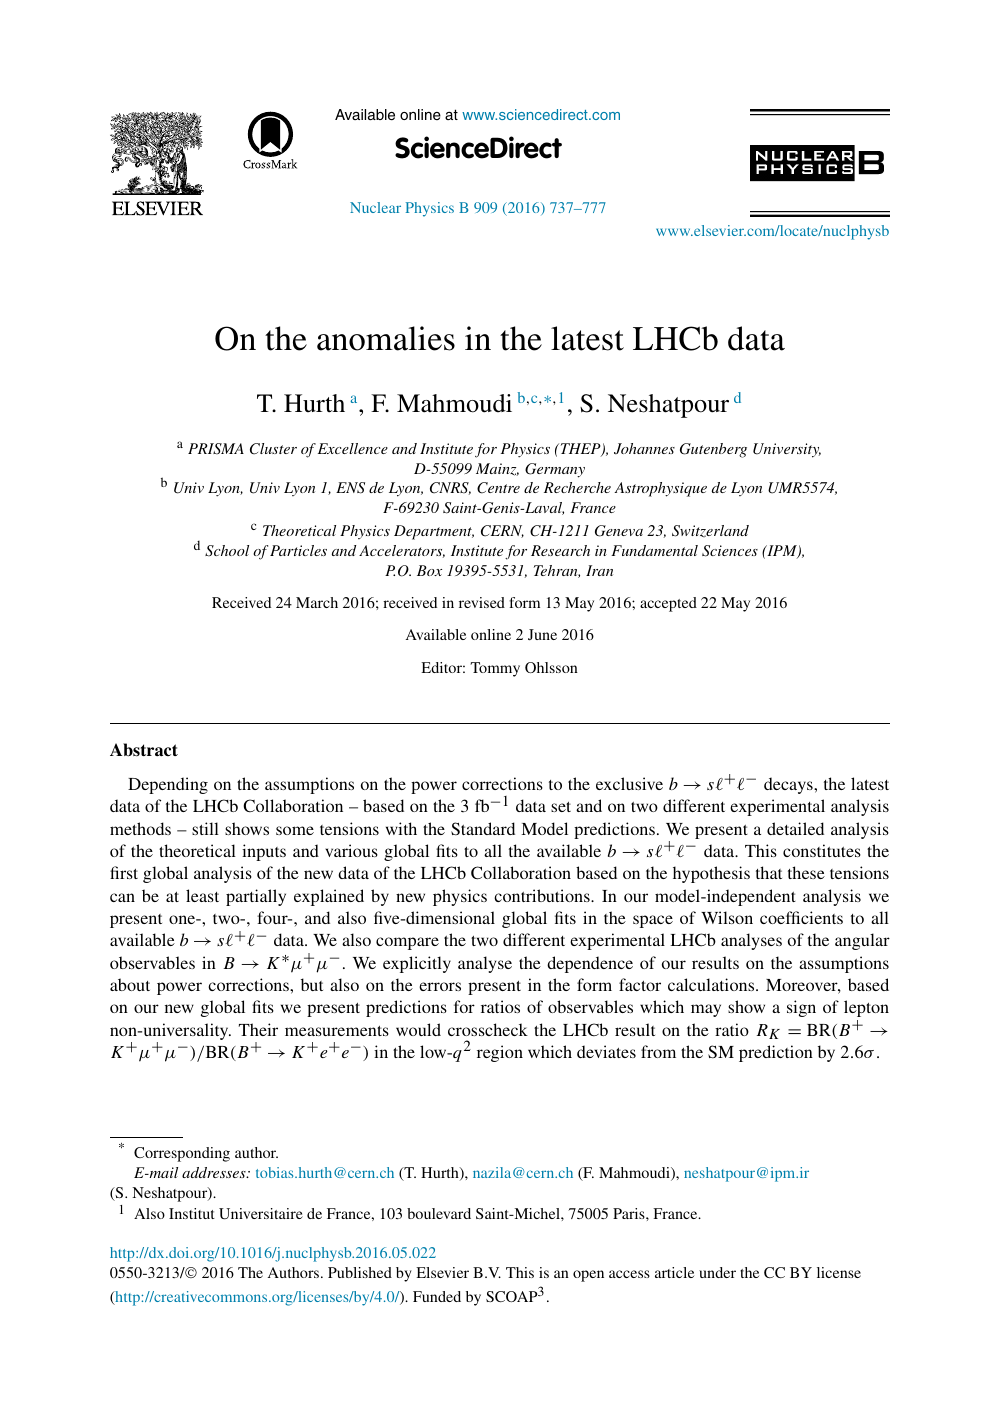 On The Anomalies In The Latest Lhcb Data Topic Of Research Paper In Physical Sciences Download Scholarly Article Pdf And Read For Free On Cyberleninka Open Science Hub